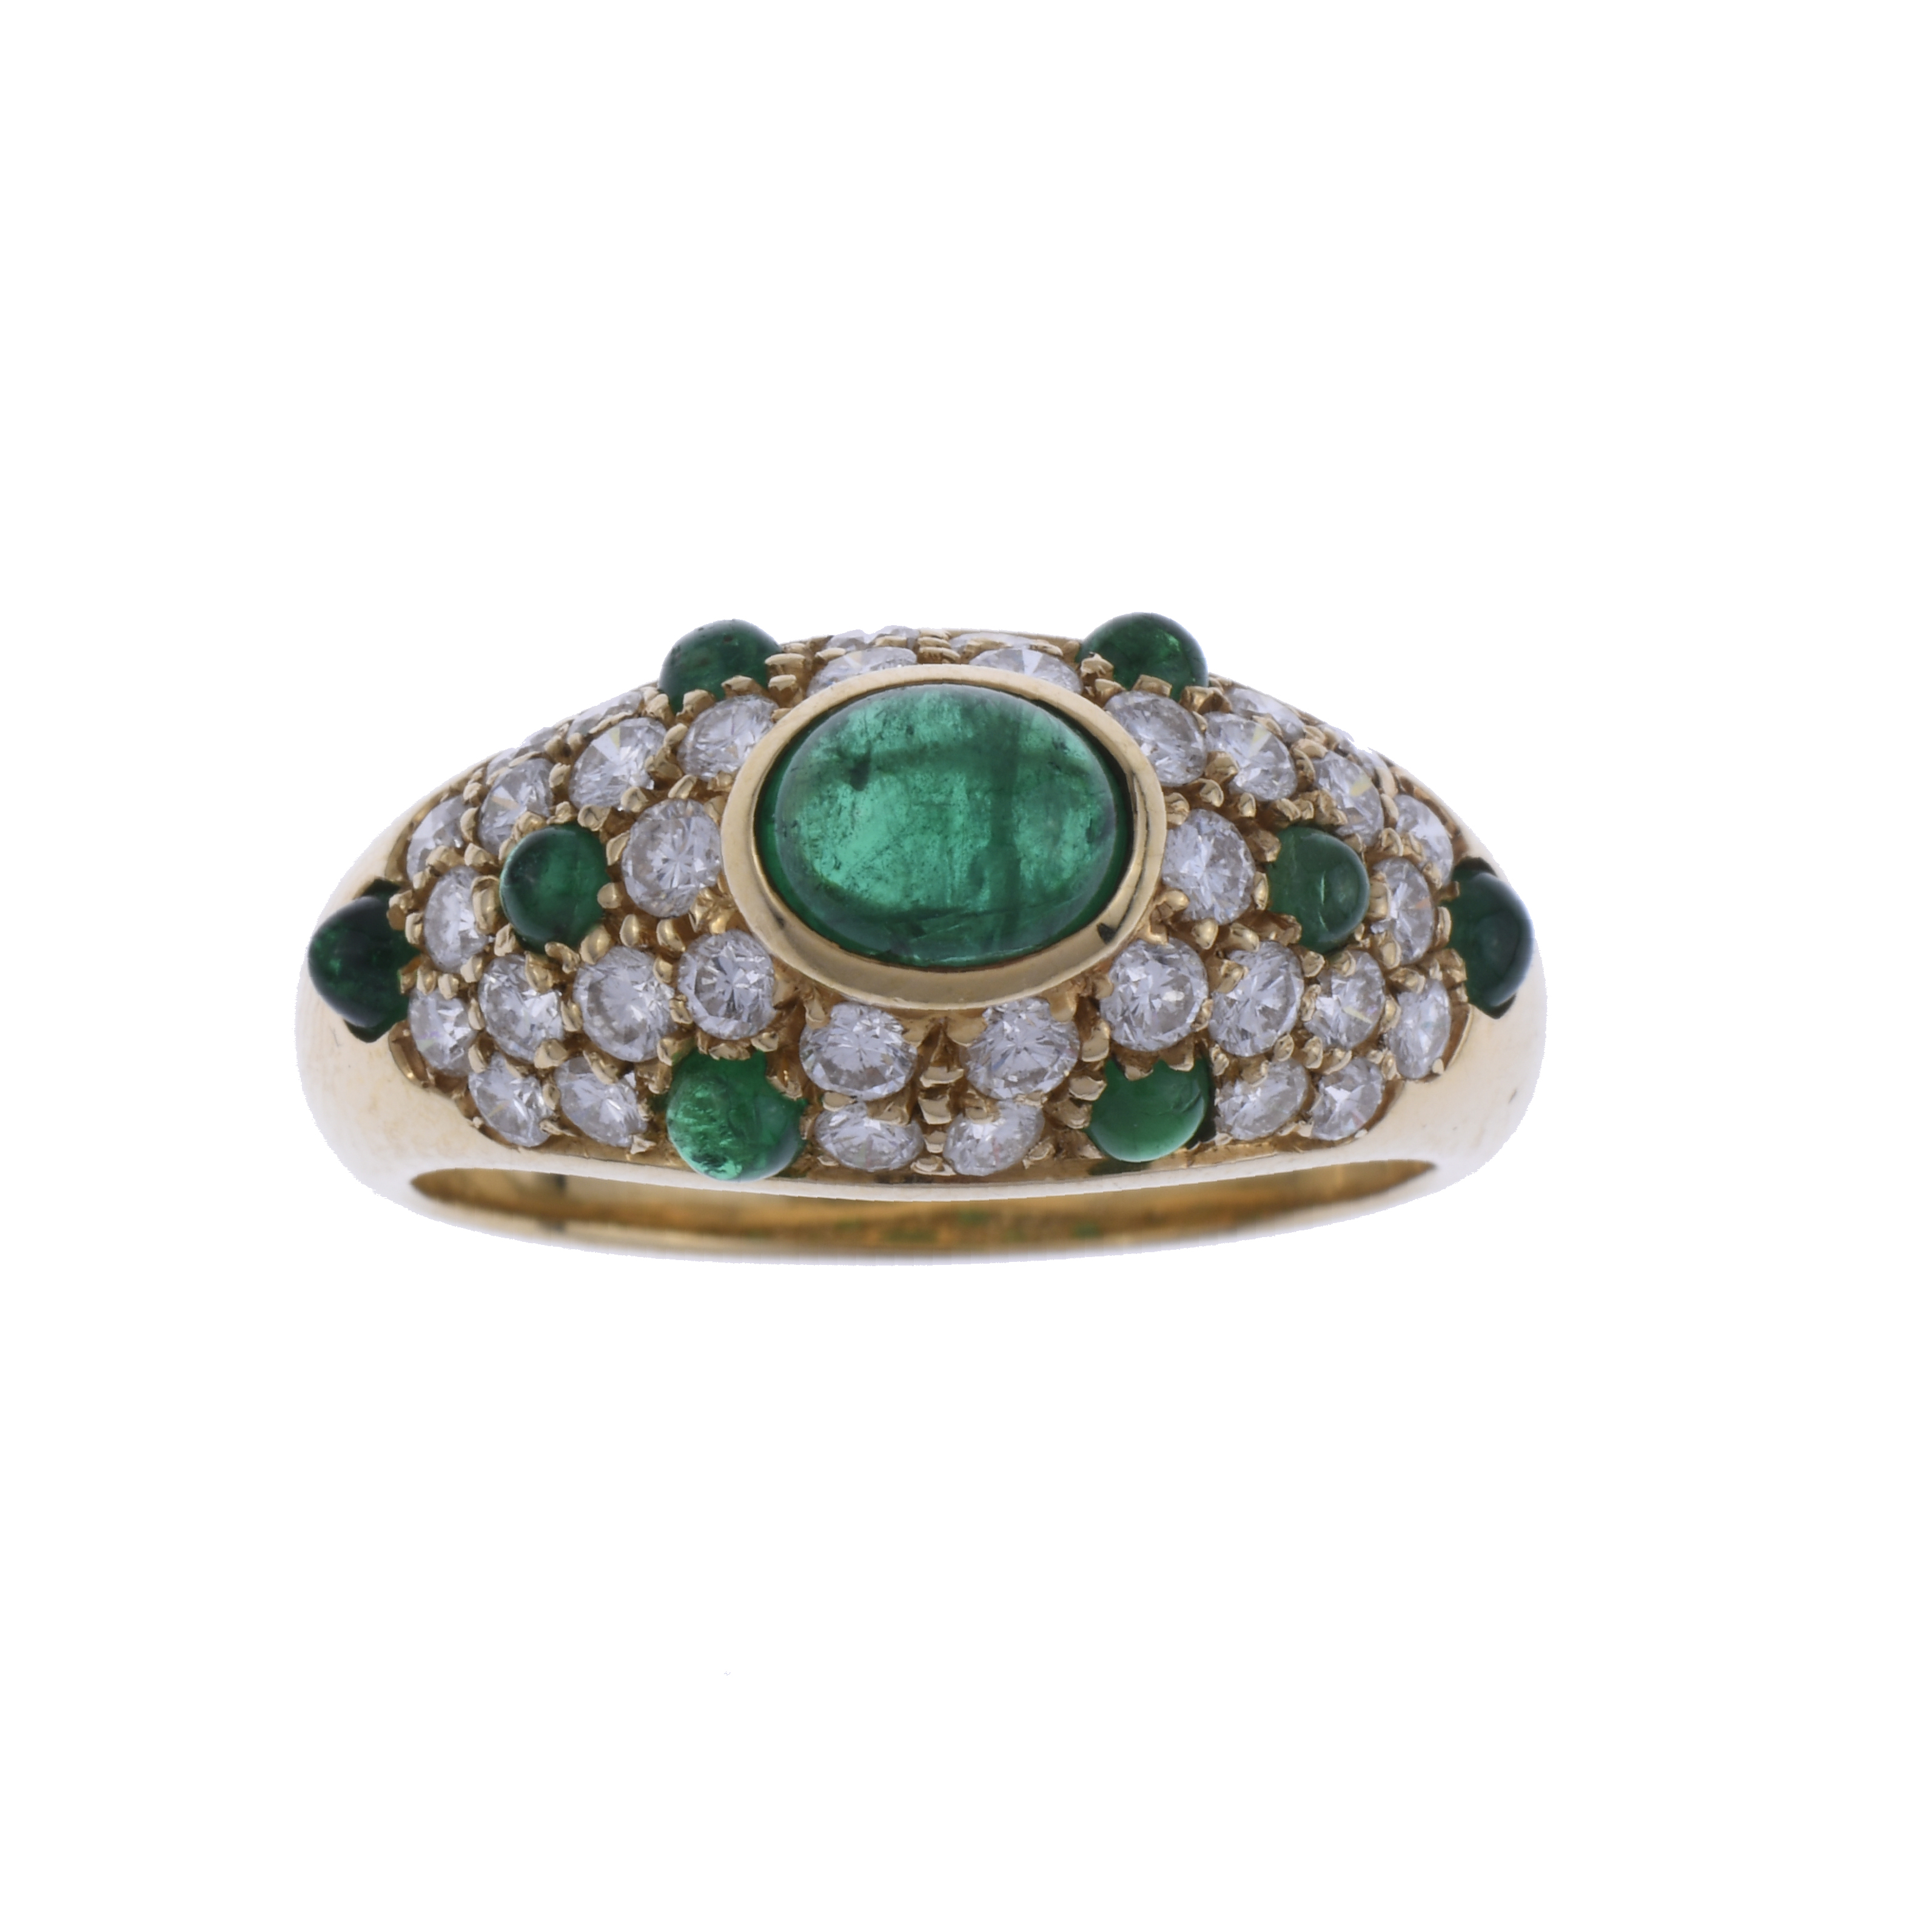 RING WITH DIAMONDS AND EMERALDS.